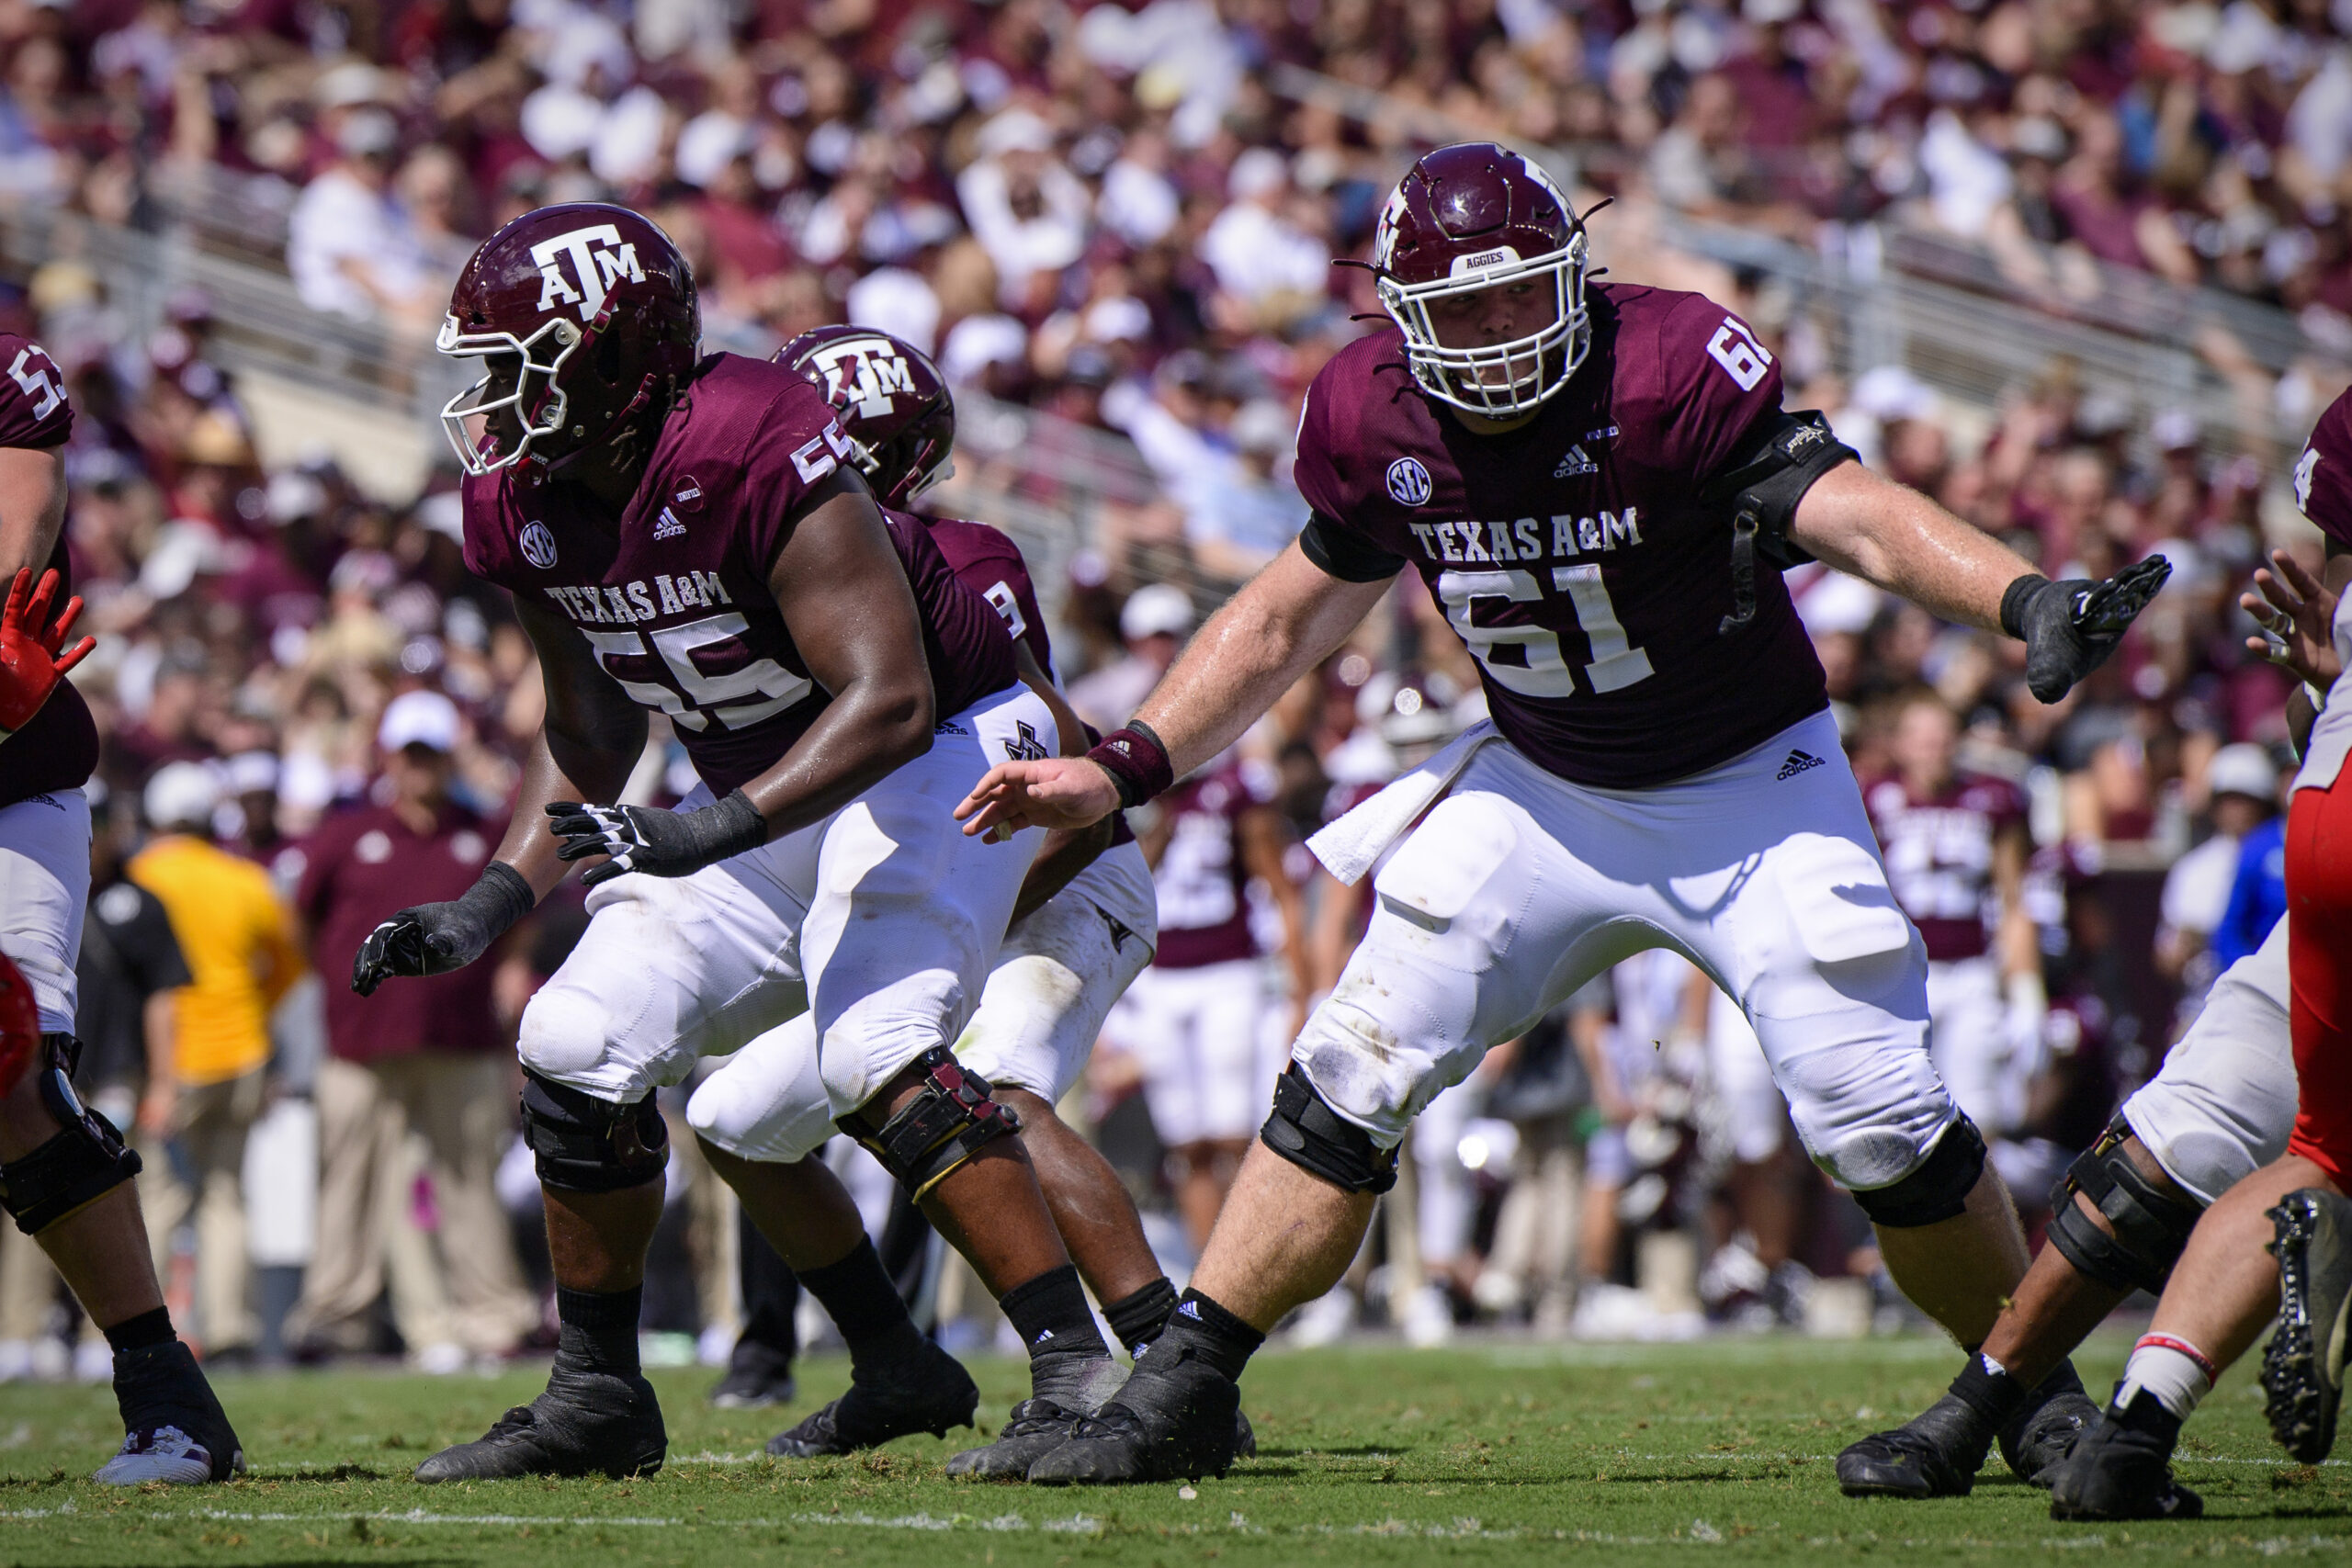 Texas A&M’s Offensive line depth resembling shades of 2020’s elite unit